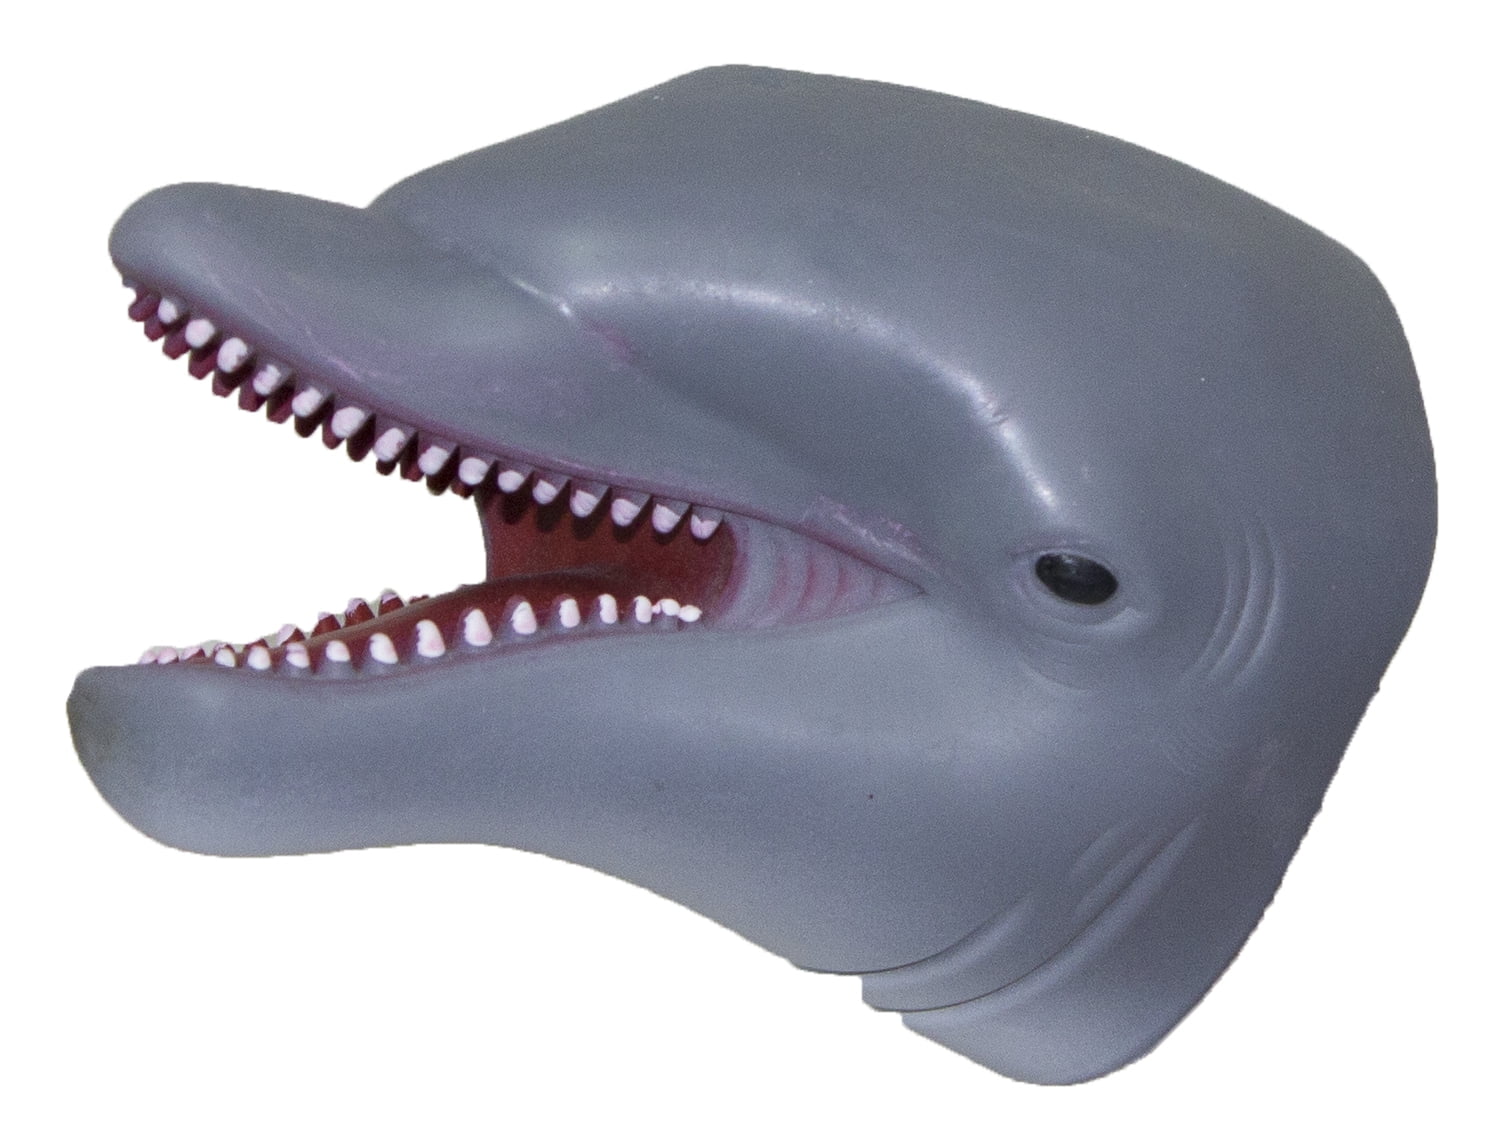 Soft Realistic Rubber Toy Barry-Owen Co Dolphin Hand Puppet 